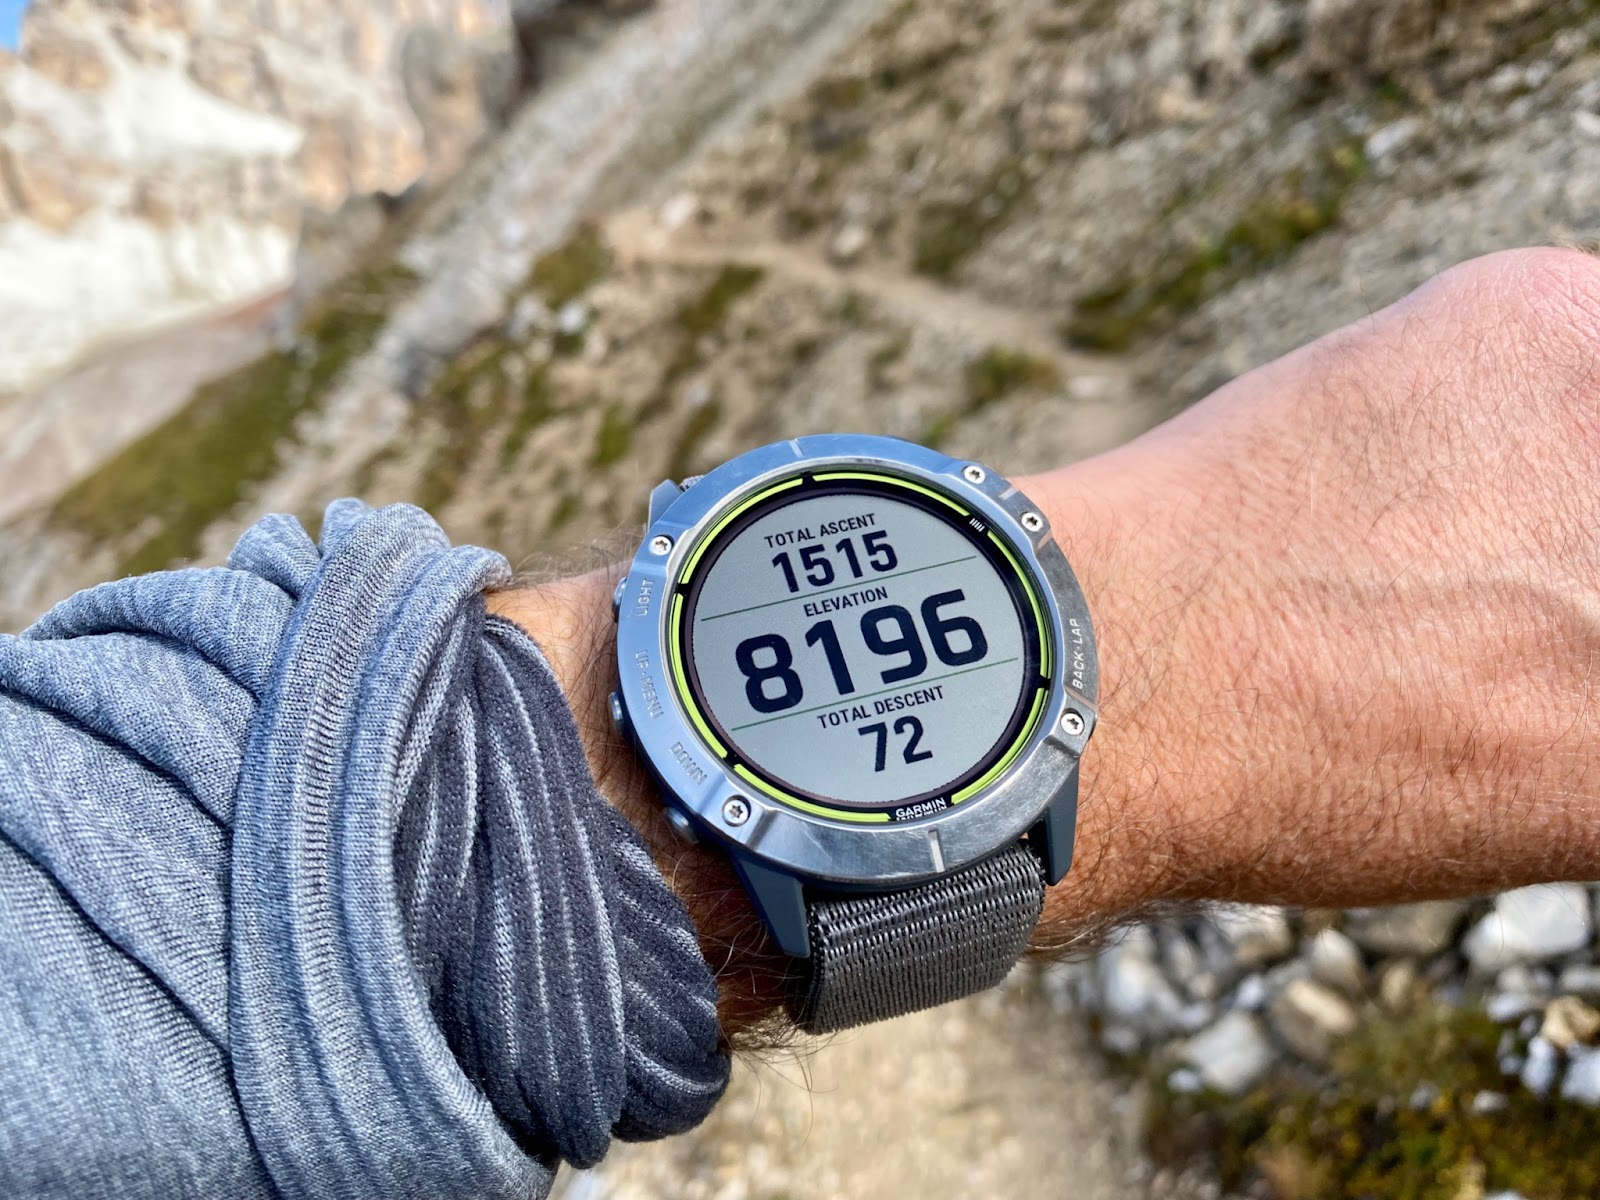 Road Trail Garmin Enduro GPS Watch Review: Long Battery Life and Legibility!